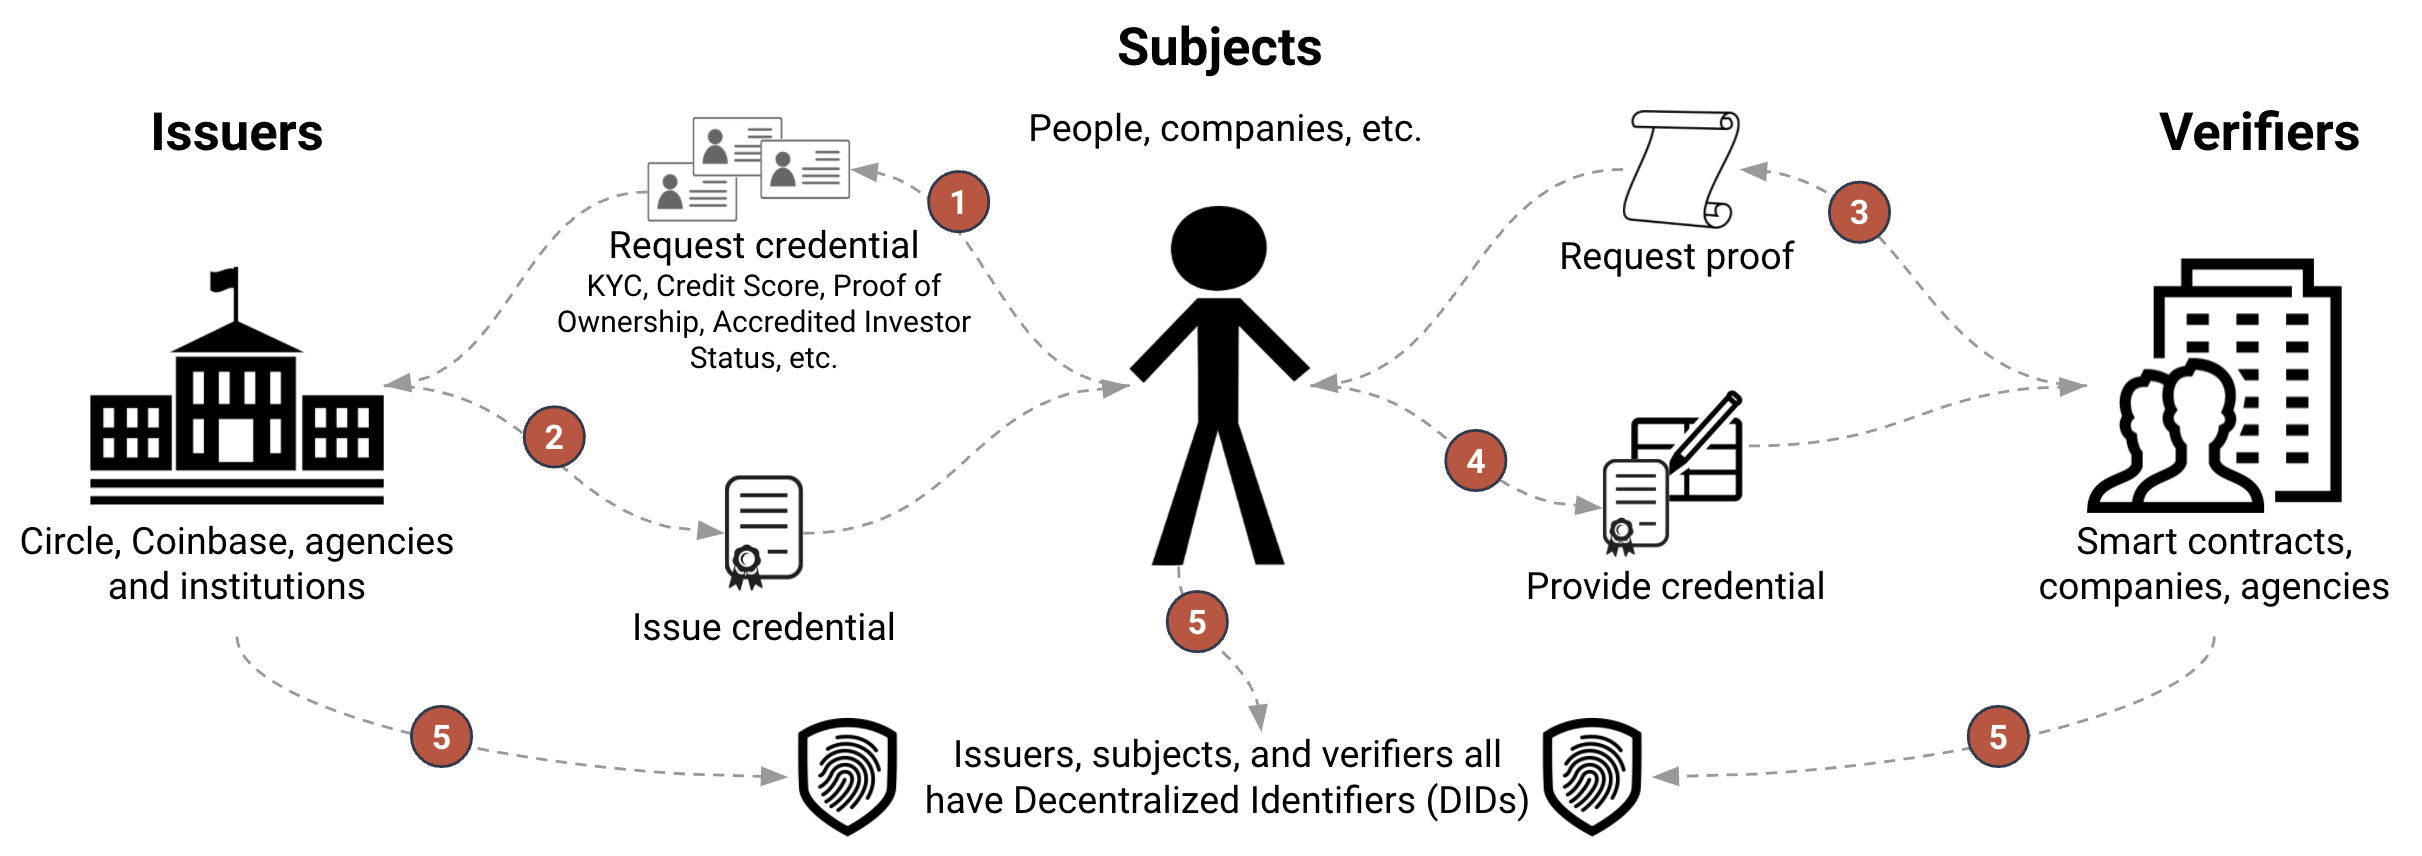 Identity relationship between issuer, subject, verifier, and registry